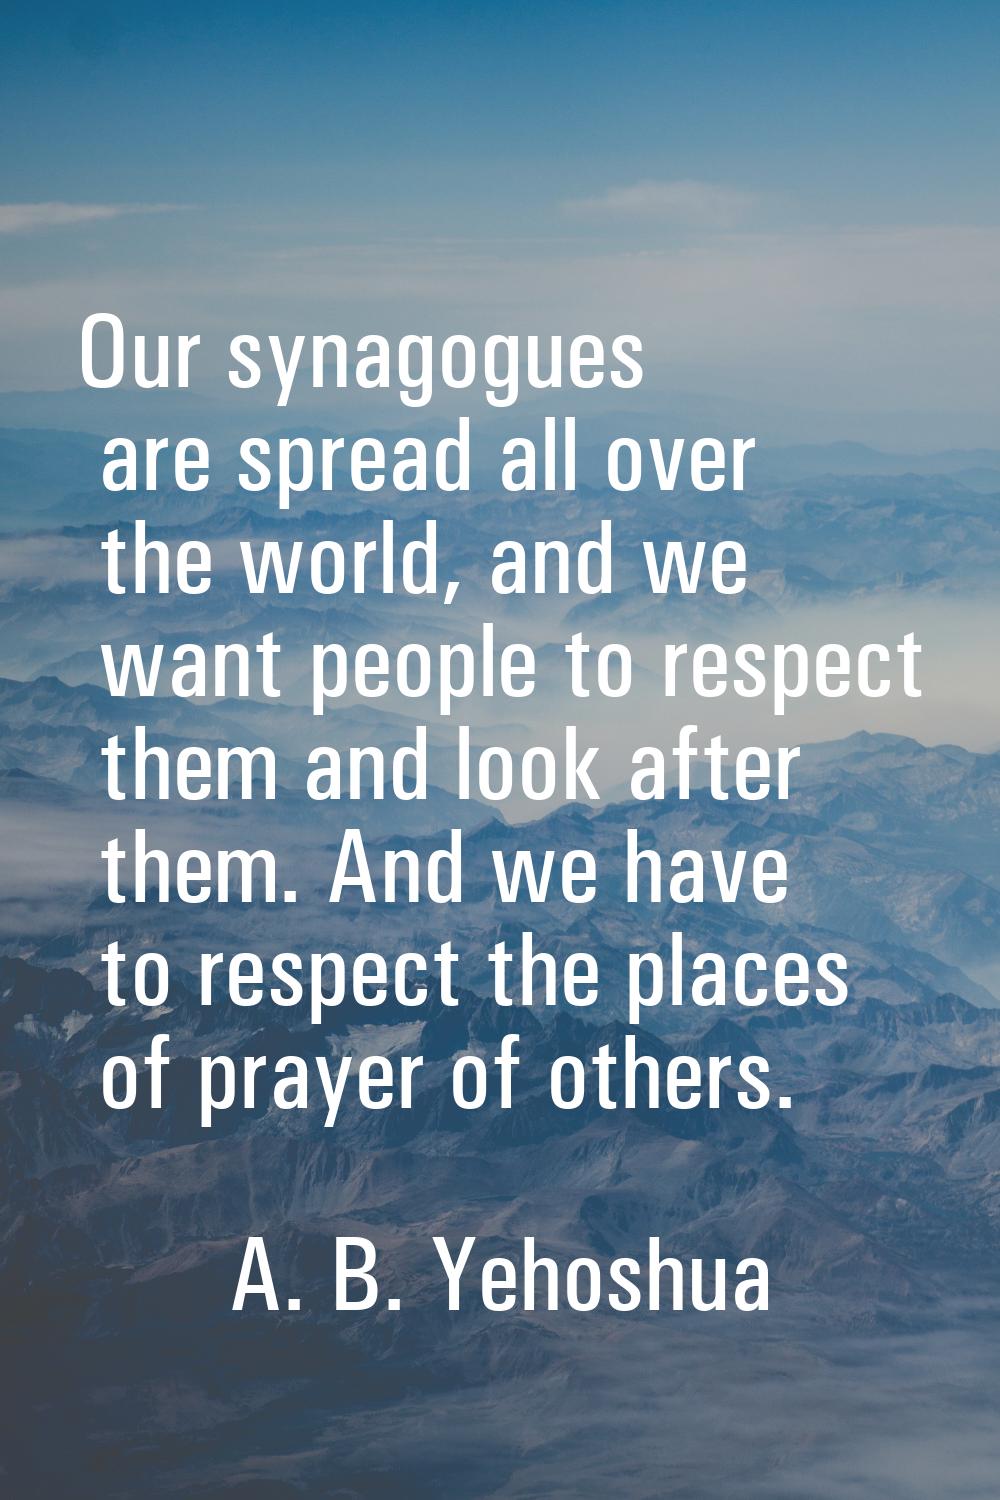 Our synagogues are spread all over the world, and we want people to respect them and look after the